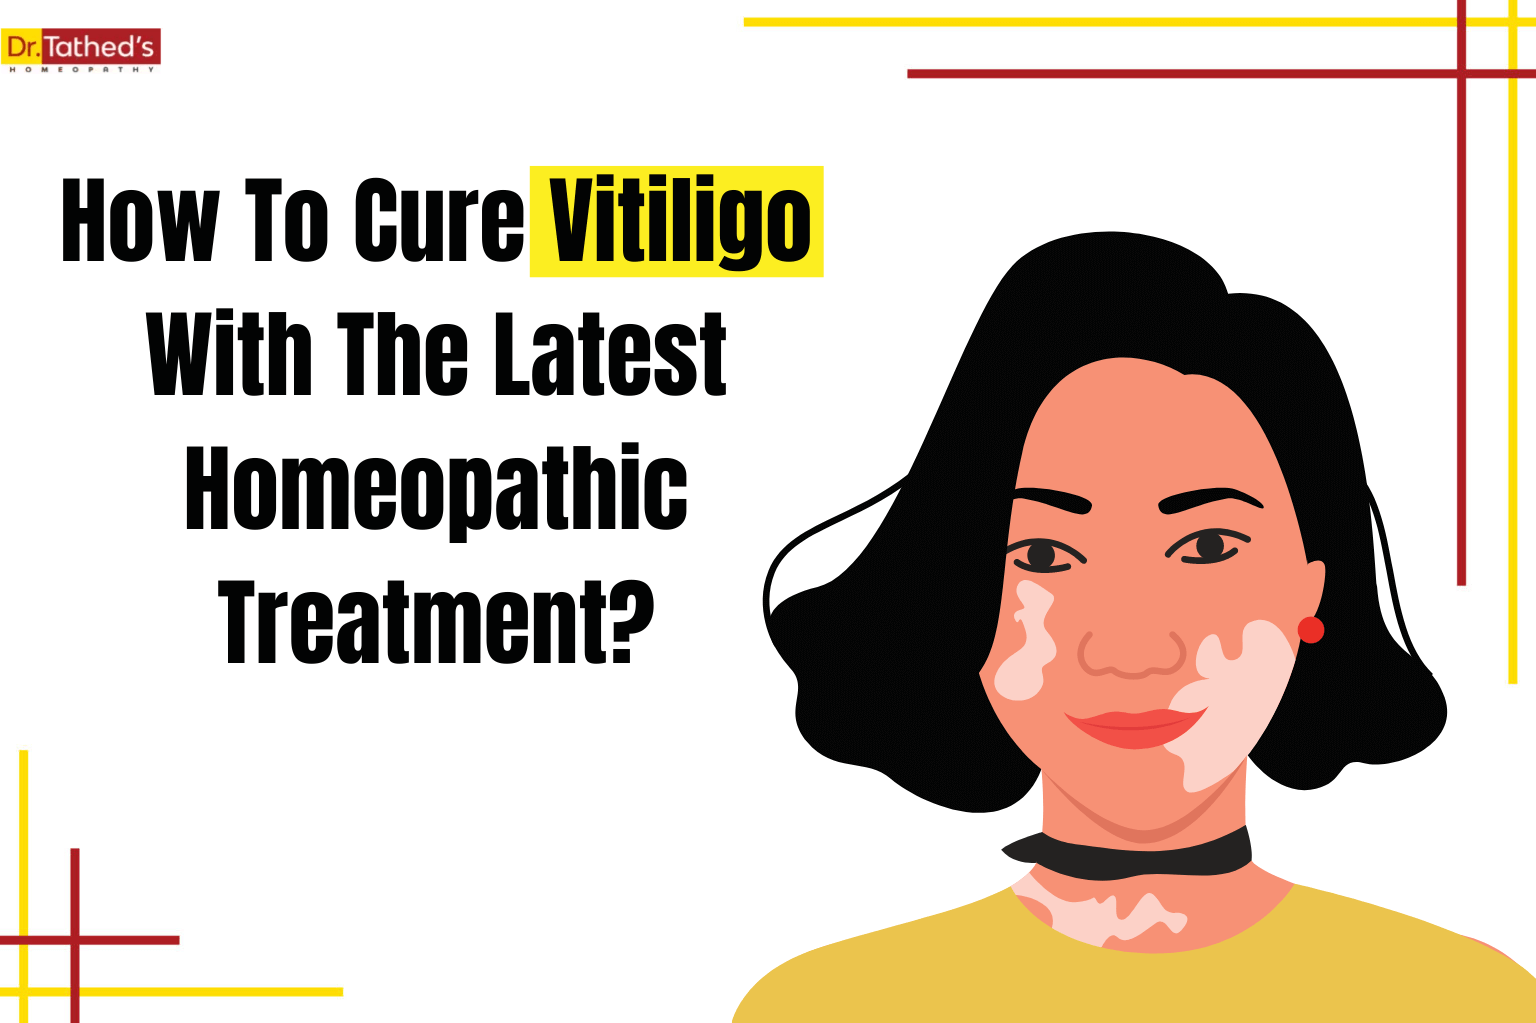 How To Cure Vitiligo With The Latest Homeopathic Treatment?